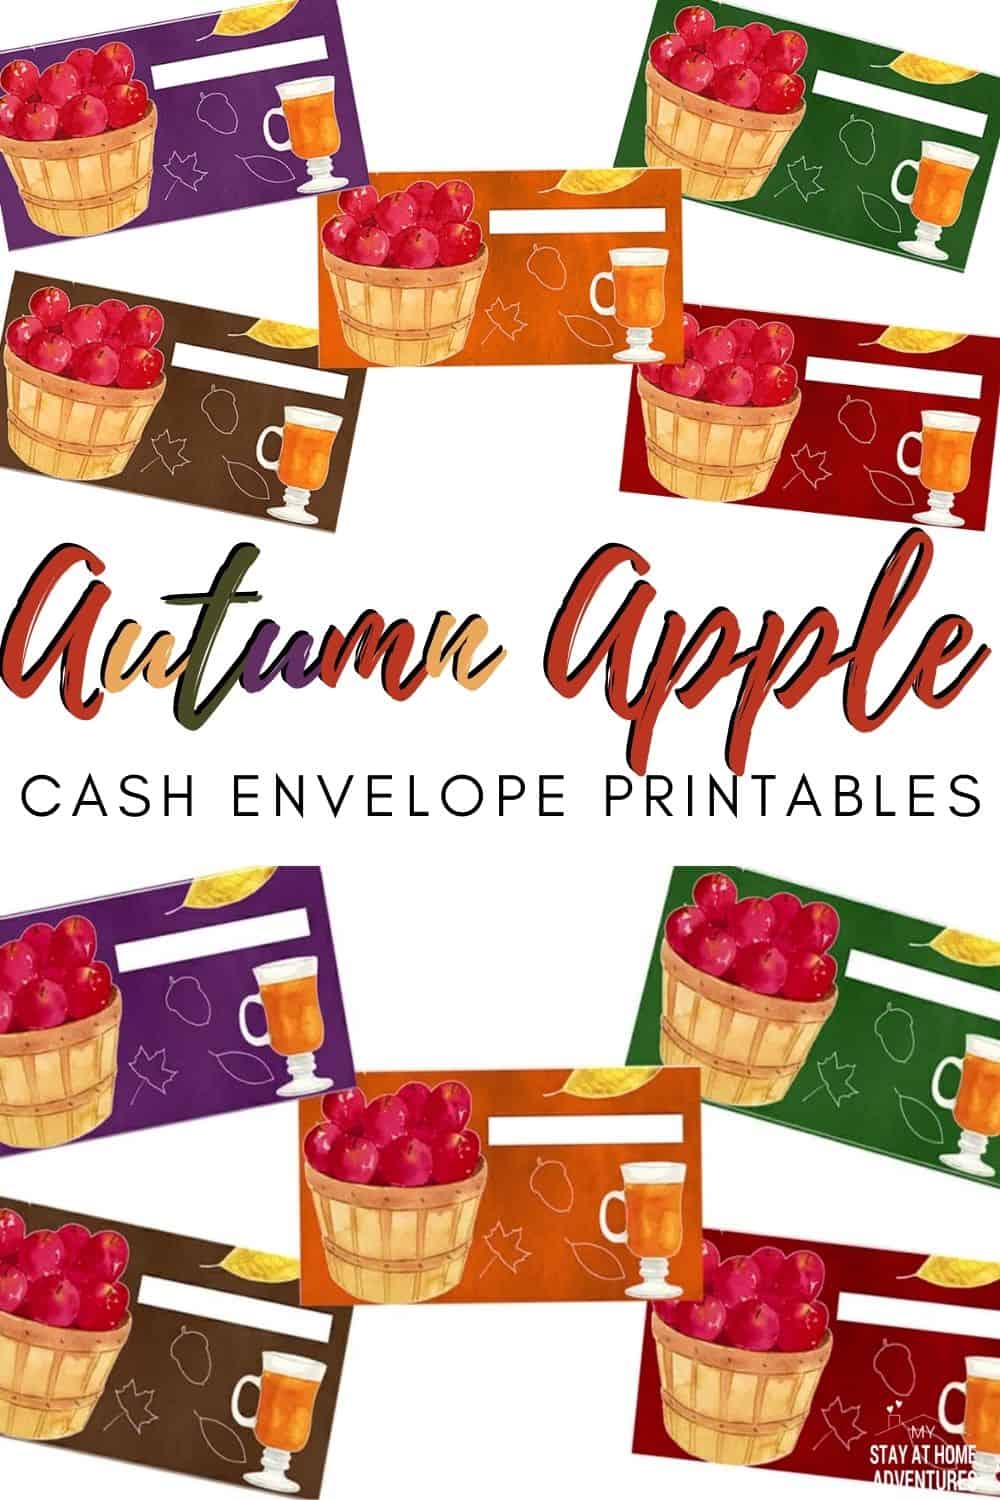 Check out these Autumn Apple Cash Envelopes to help you keep your cash organize and your budget intact with these beautiful printables. via @mystayathome